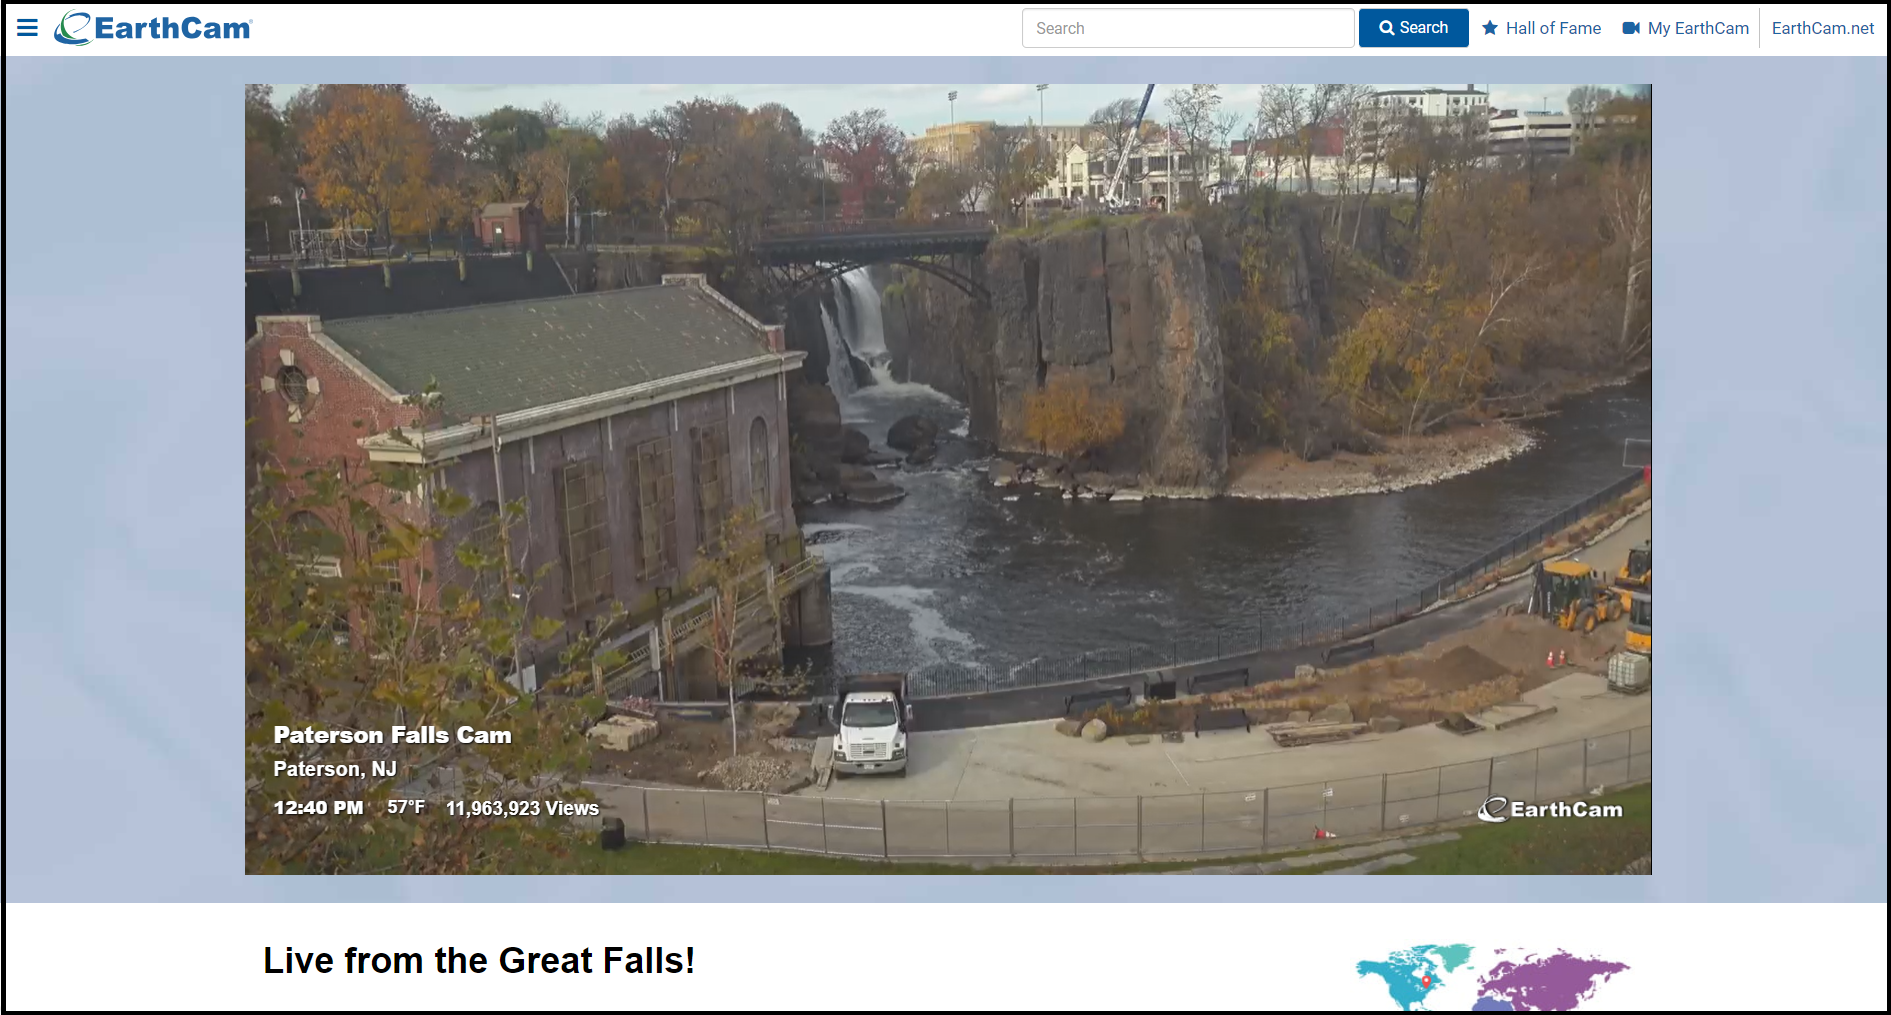 Screenshot of an Earthcam webpage showing the 77 ft. waterfall, arched metal bridge, & brick power plant at Paterson Great Falls